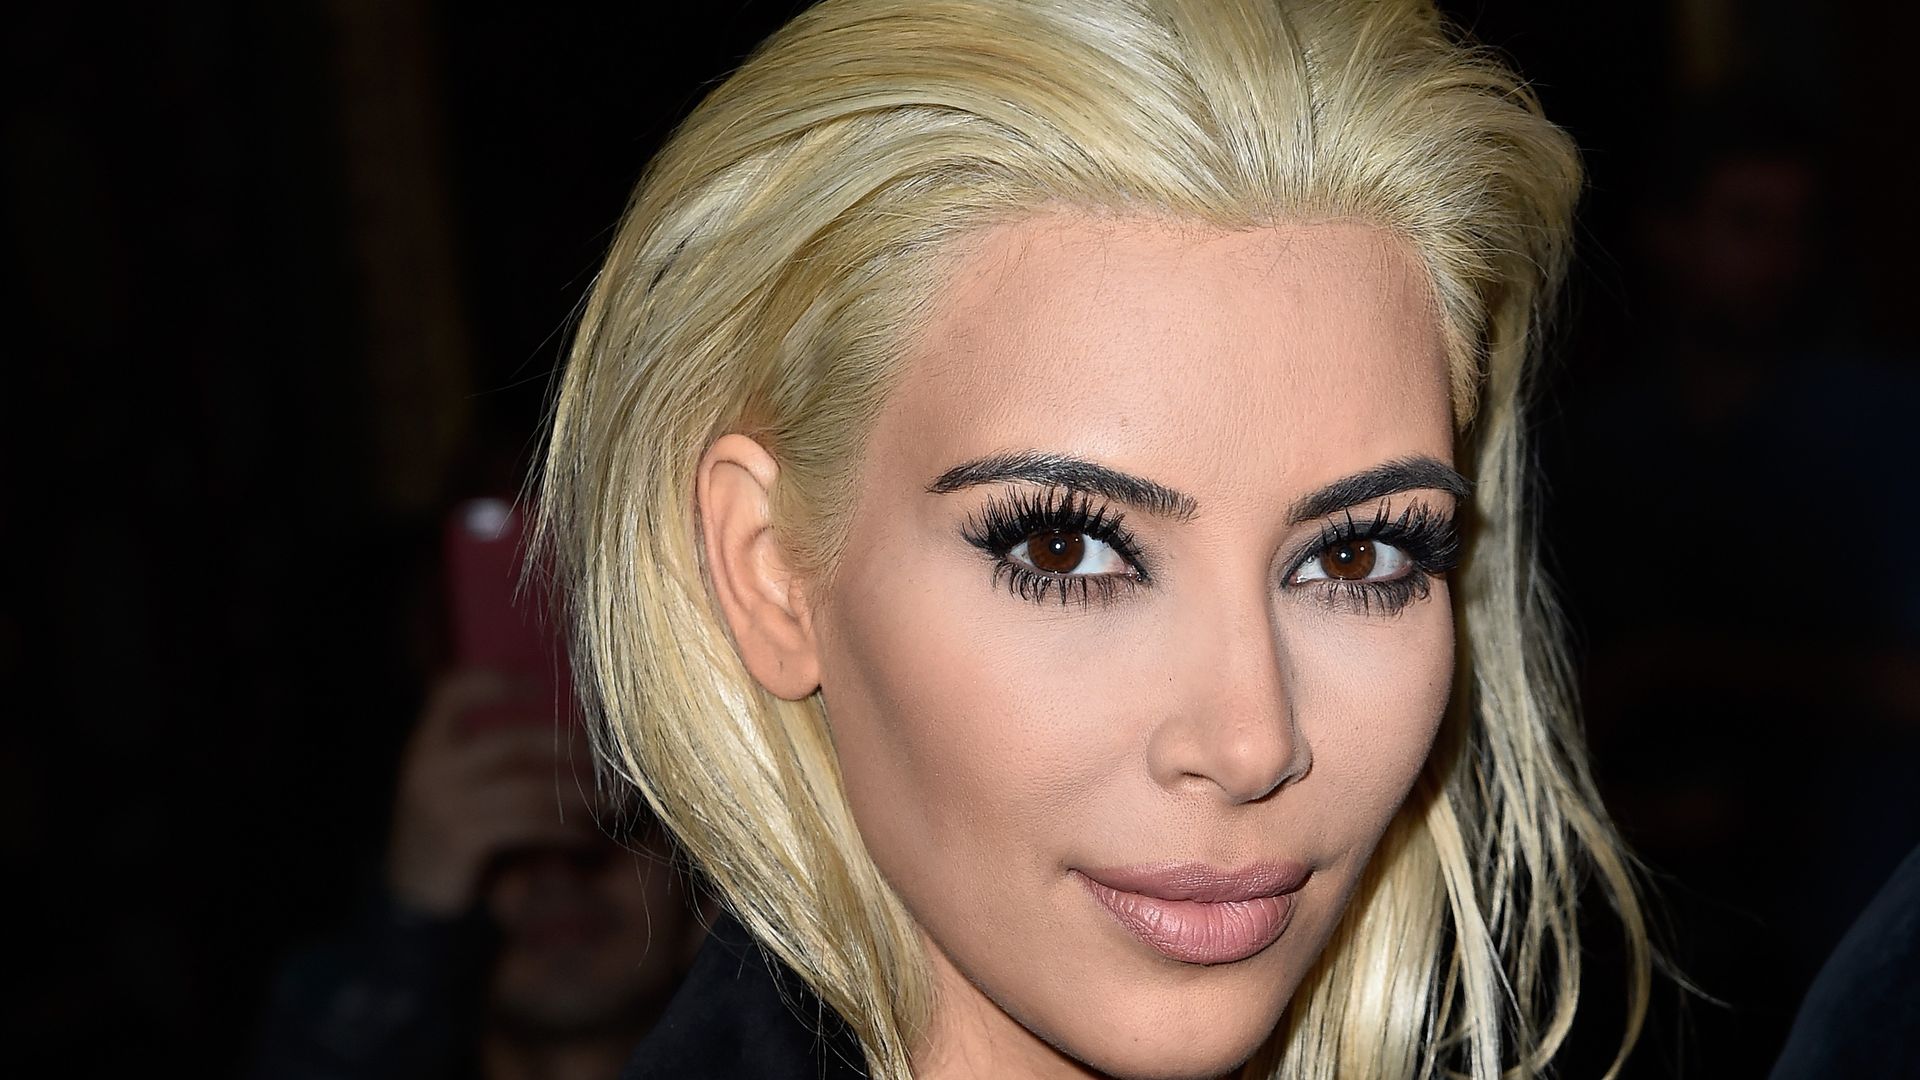 All the times Kim Kardashian absolutely bossed it as a blonde